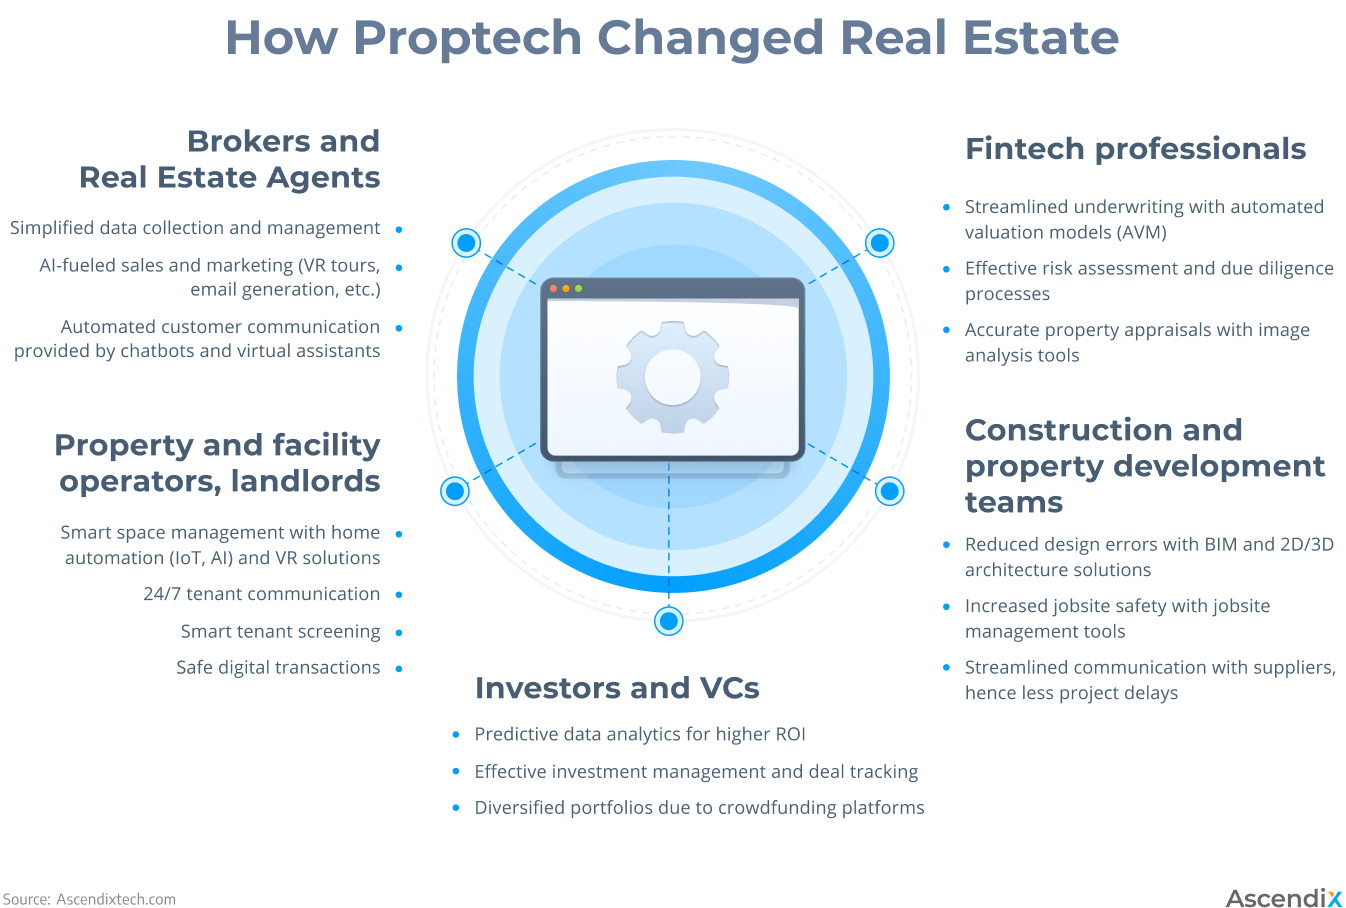 How Proptech Changed Real Estate